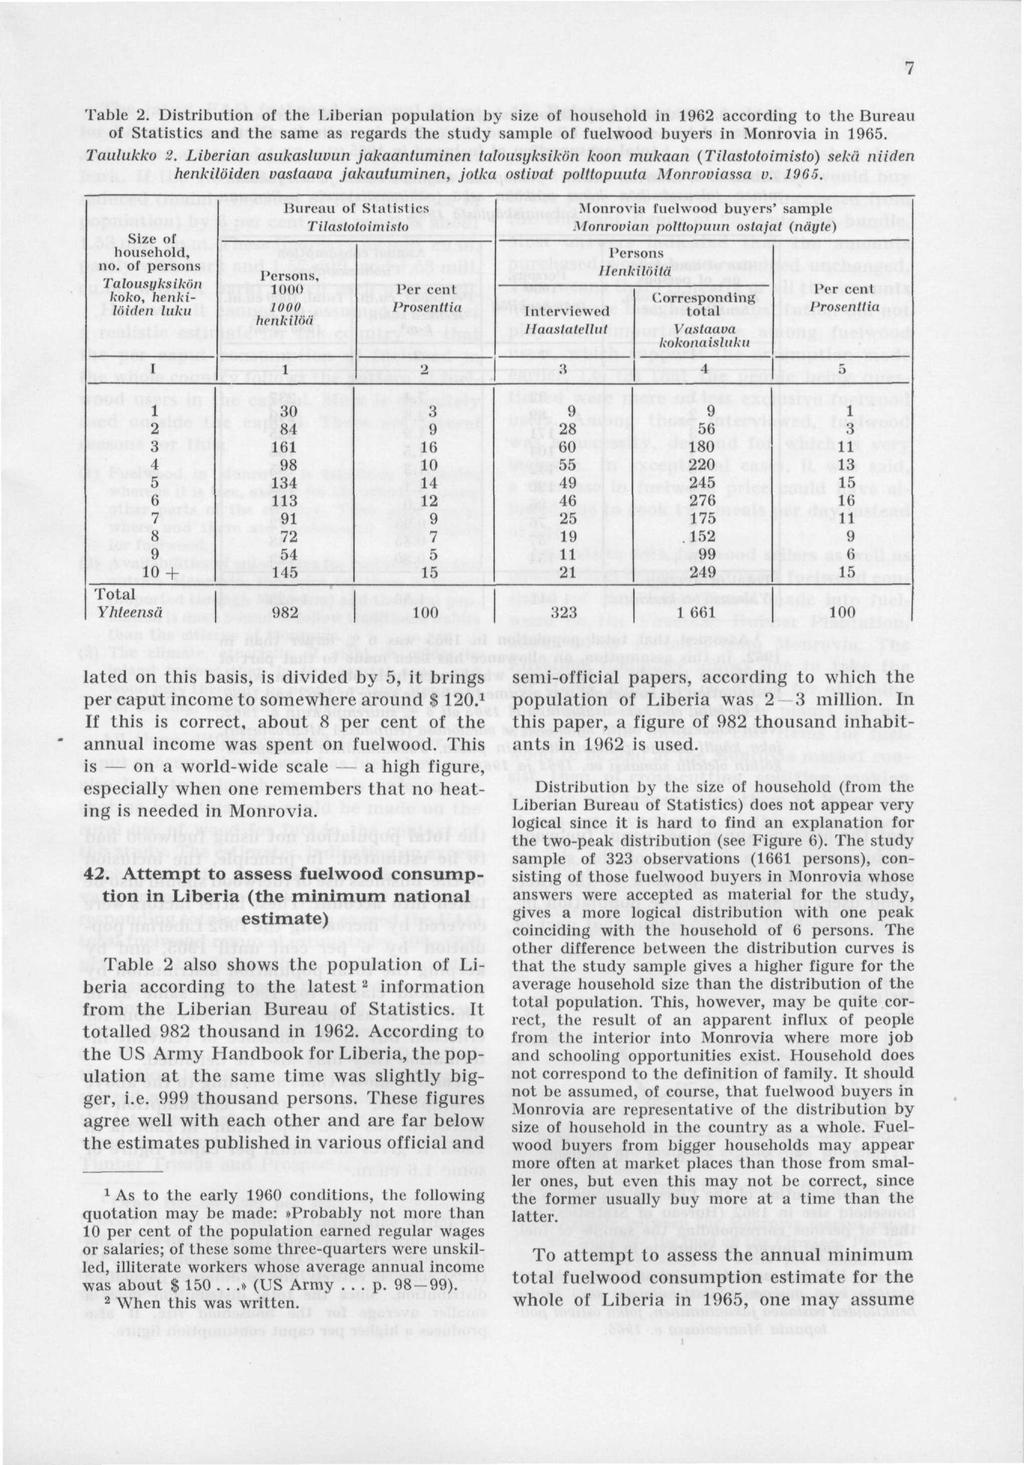 Table 2. Distribution of the Liberian population by size of household in 962 according to the Bureau of Statistics and the same as regards the study sample of fuelwood buyers in Monrovia in 965.